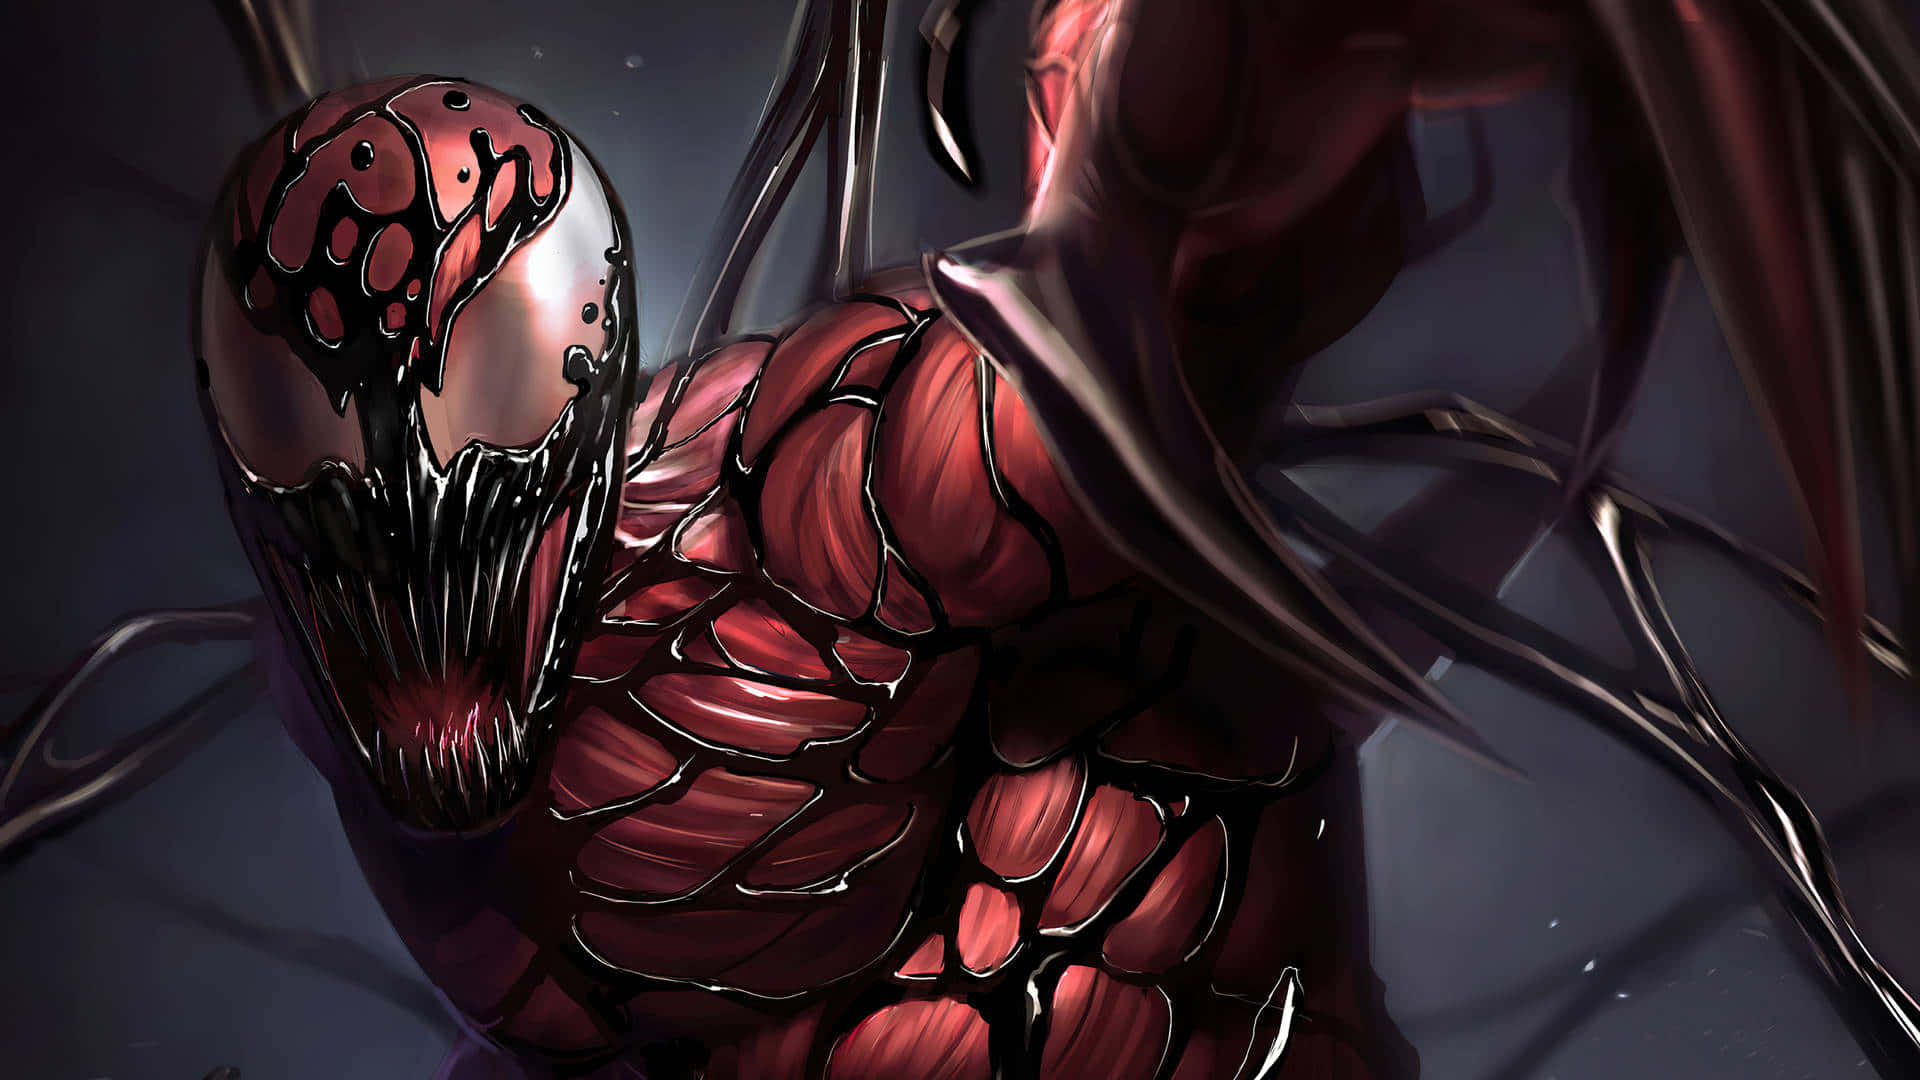 "Get ready to face Marvel's most ruthless character - Carnage" Wallpaper